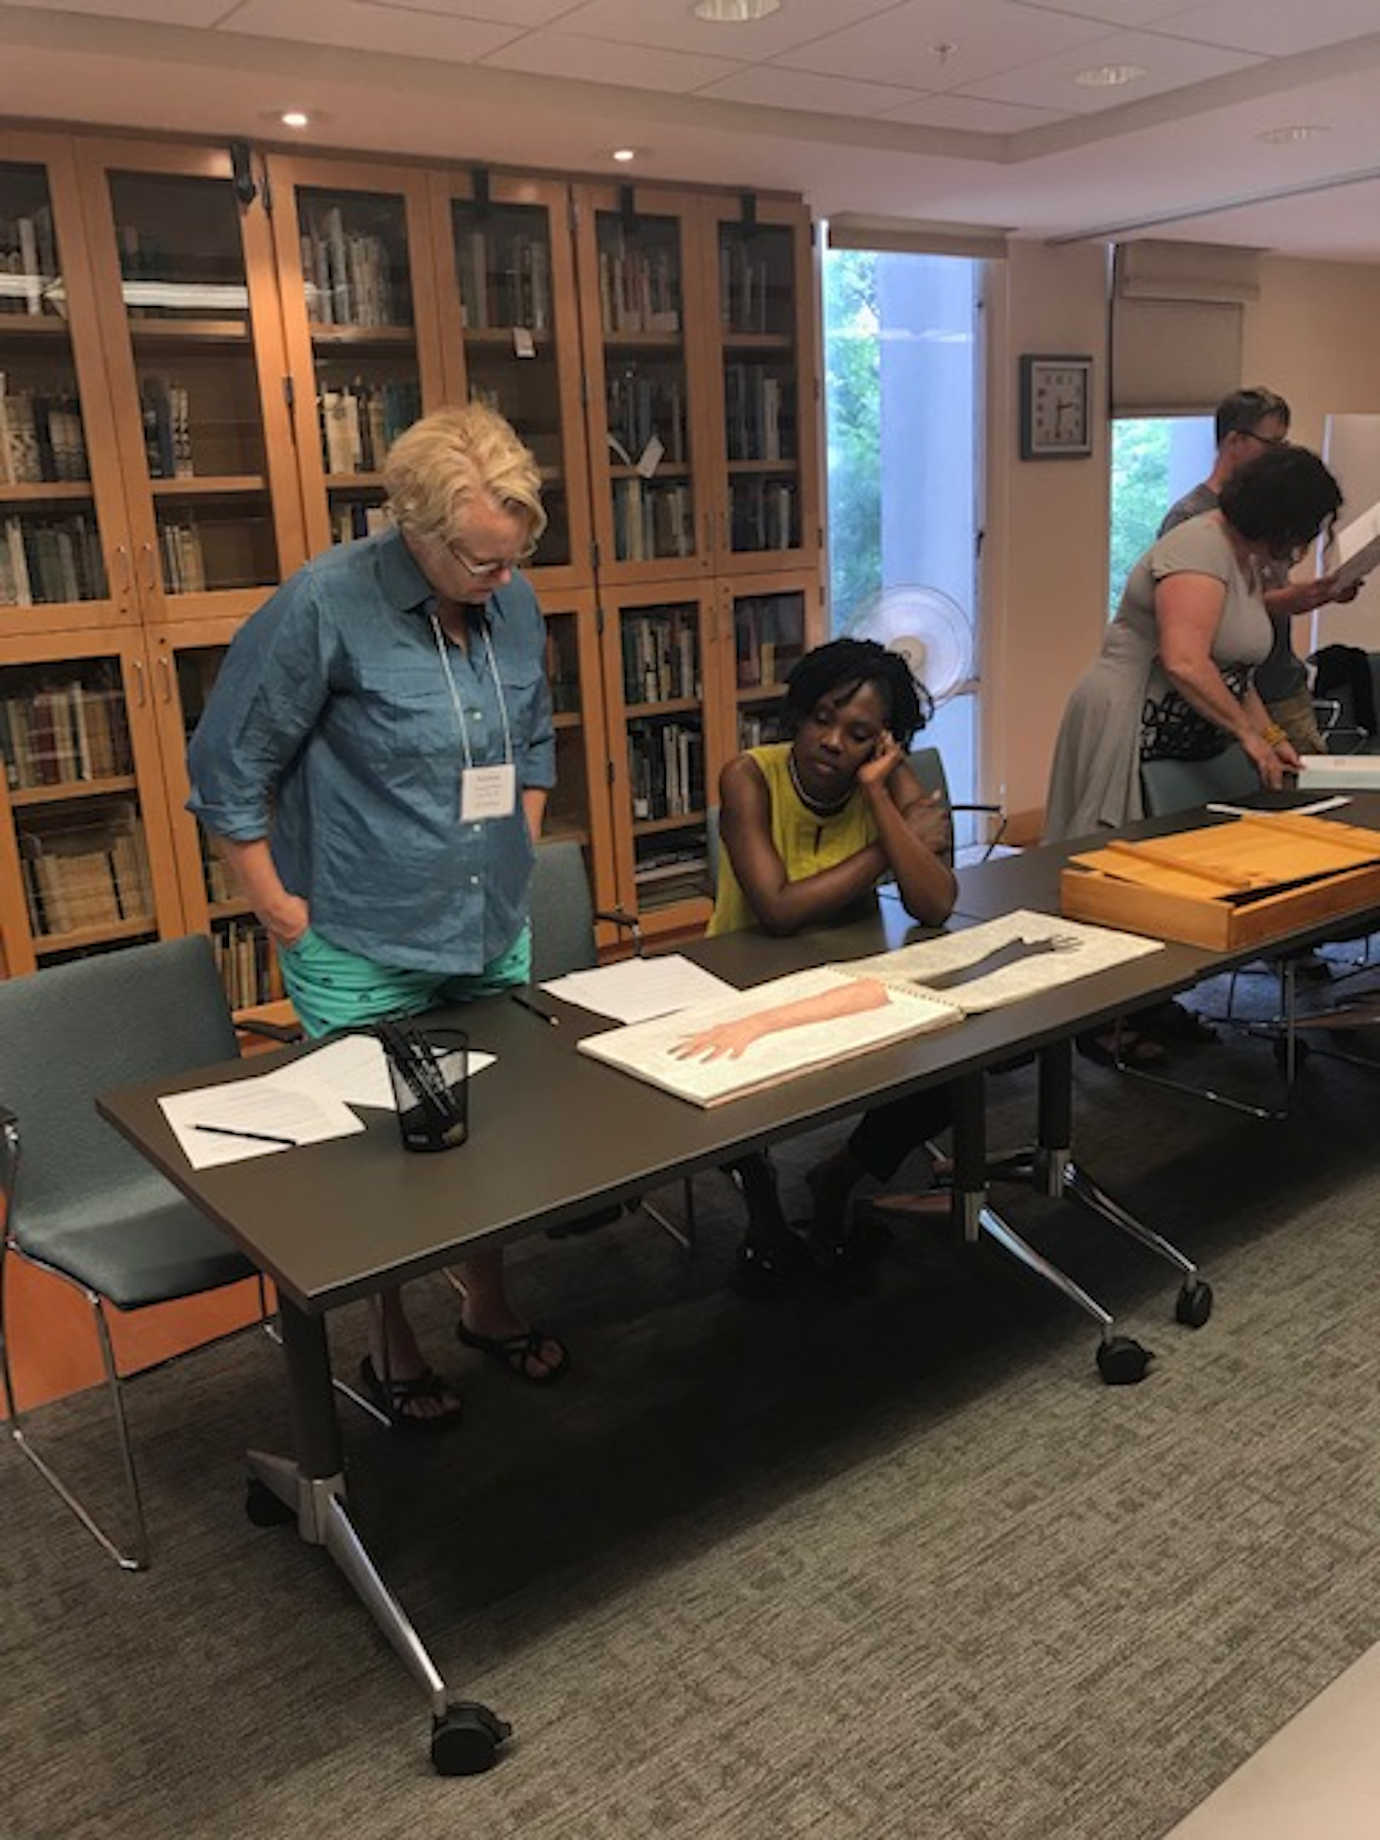 Teachers explored a wide variety of visual forms. Image courtesy of Bowdoin College.